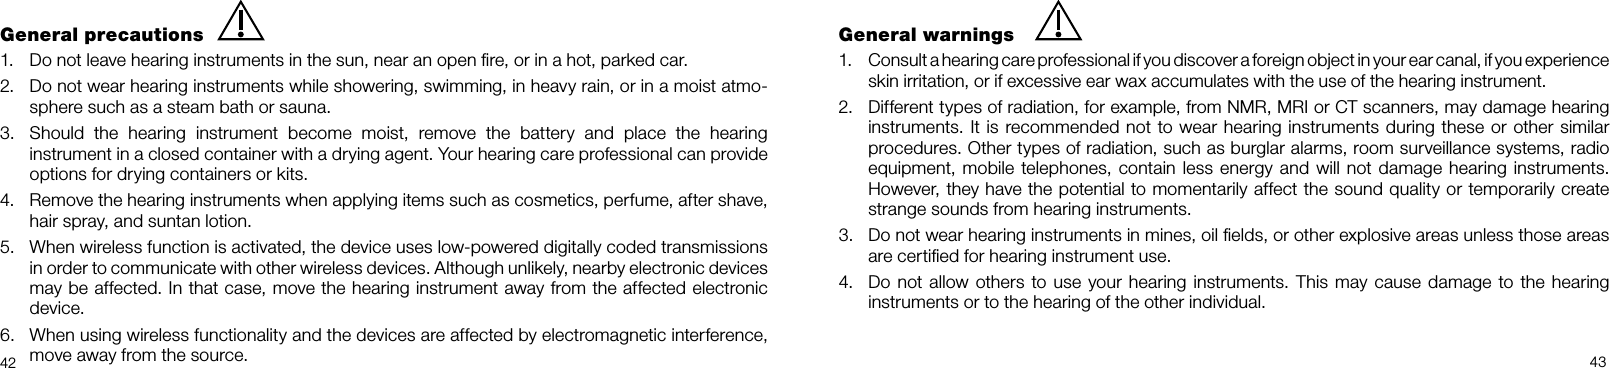   42 43General precautions1.  Do not leave hearing instruments in the sun, near an open ﬁre, or in a hot, parked car.2.  Do not wear hearing instruments while showering, swimming, in heavy rain, or in a moist atmo-sphere such as a steam bath or sauna.3.  Should the hearing instrument become moist, remove the battery and place the hearing instrument in a closed container with a drying agent. Your hearing care professional can provide options for drying containers or kits.4.  Remove the hearing instruments when applying items such as cosmetics, perfume, after shave, hair spray, and suntan lotion. 5.  When wireless function is activated, the device uses low-powered digitally coded transmissions in order to communicate with other wireless devices. Although unlikely, nearby electronic devices may be affected. In that case, move the hearing instrument away from the affected electronic device.6.  When using wireless functionality and the devices are affected by electromagnetic interference, move away from the source.General warnings1.  Consult a hearing care professional if you discover a foreign object in your ear canal, if you experience skin irritation, or if excessive ear wax accumulates with the use of the hearing instrument. 2.  Different types of radiation, for example, from NMR, MRI or CT scanners, may damage hearing instruments. It is recommended not to wear hearing instruments during these or other similar procedures. Other types of radiation, such as burglar alarms, room surveillance systems, radio equipment, mobile telephones, contain less energy and will not damage hearing instruments. However, they have the potential to momentarily affect the sound quality or temporarily create strange sounds from hearing instruments.3.  Do not wear hearing instruments in mines, oil ﬁelds, or other explosive areas unless those areas are certiﬁed for hearing instrument use.4.  Do not allow others to use your hearing instruments. This may cause damage to the hearing  instruments or to the hearing of the other individual.